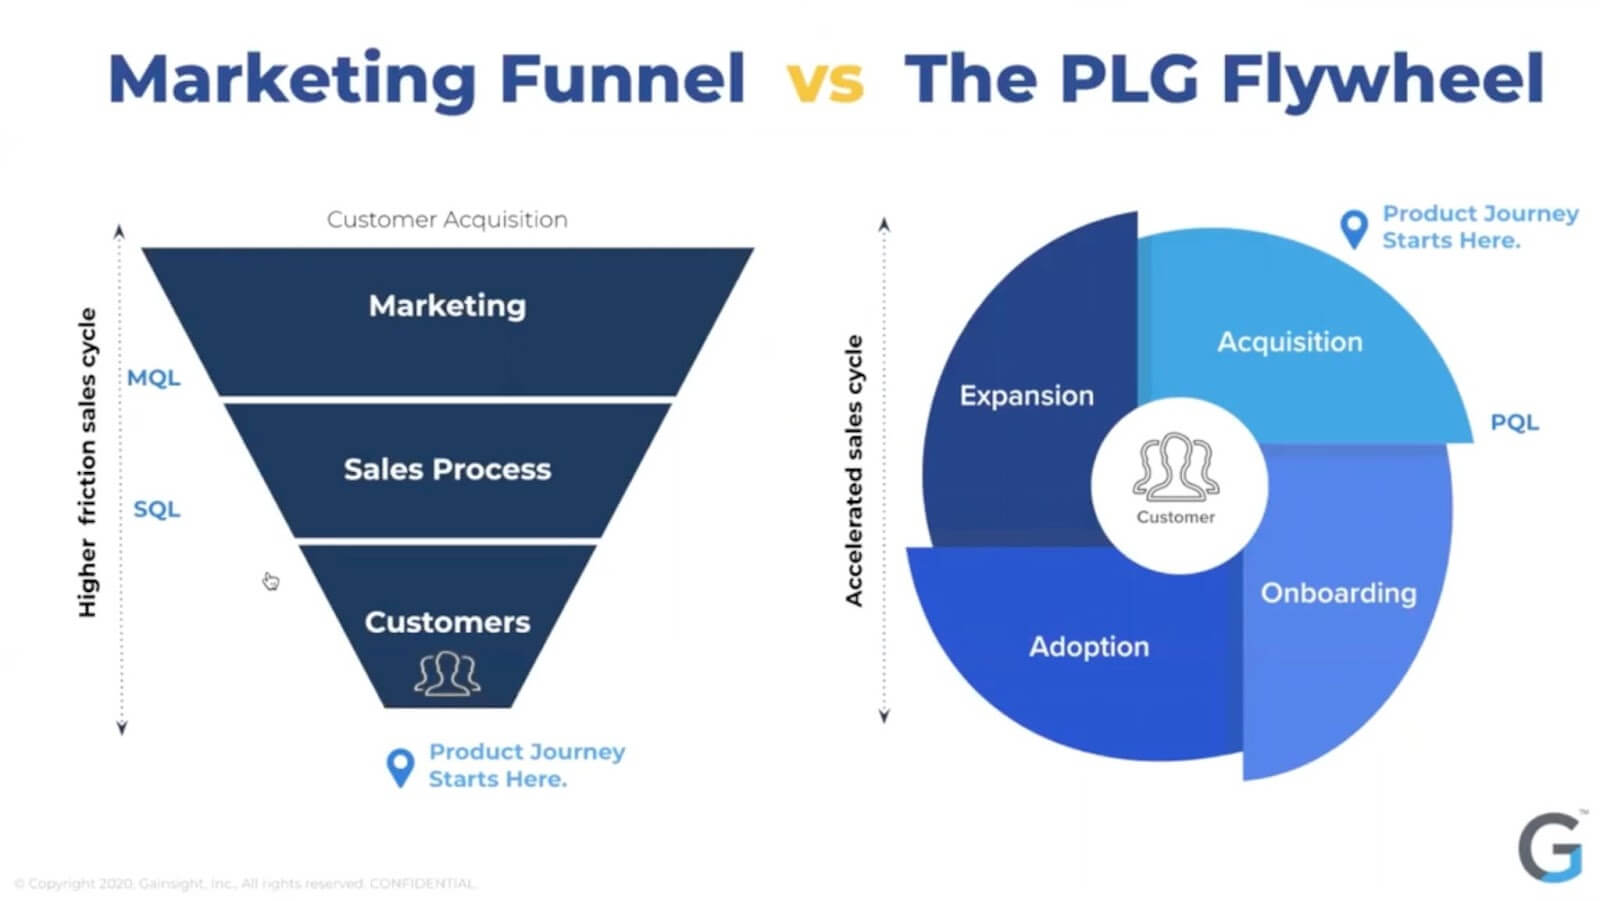 The Marketing funnell graph and the PLG flywheel graph next to each other